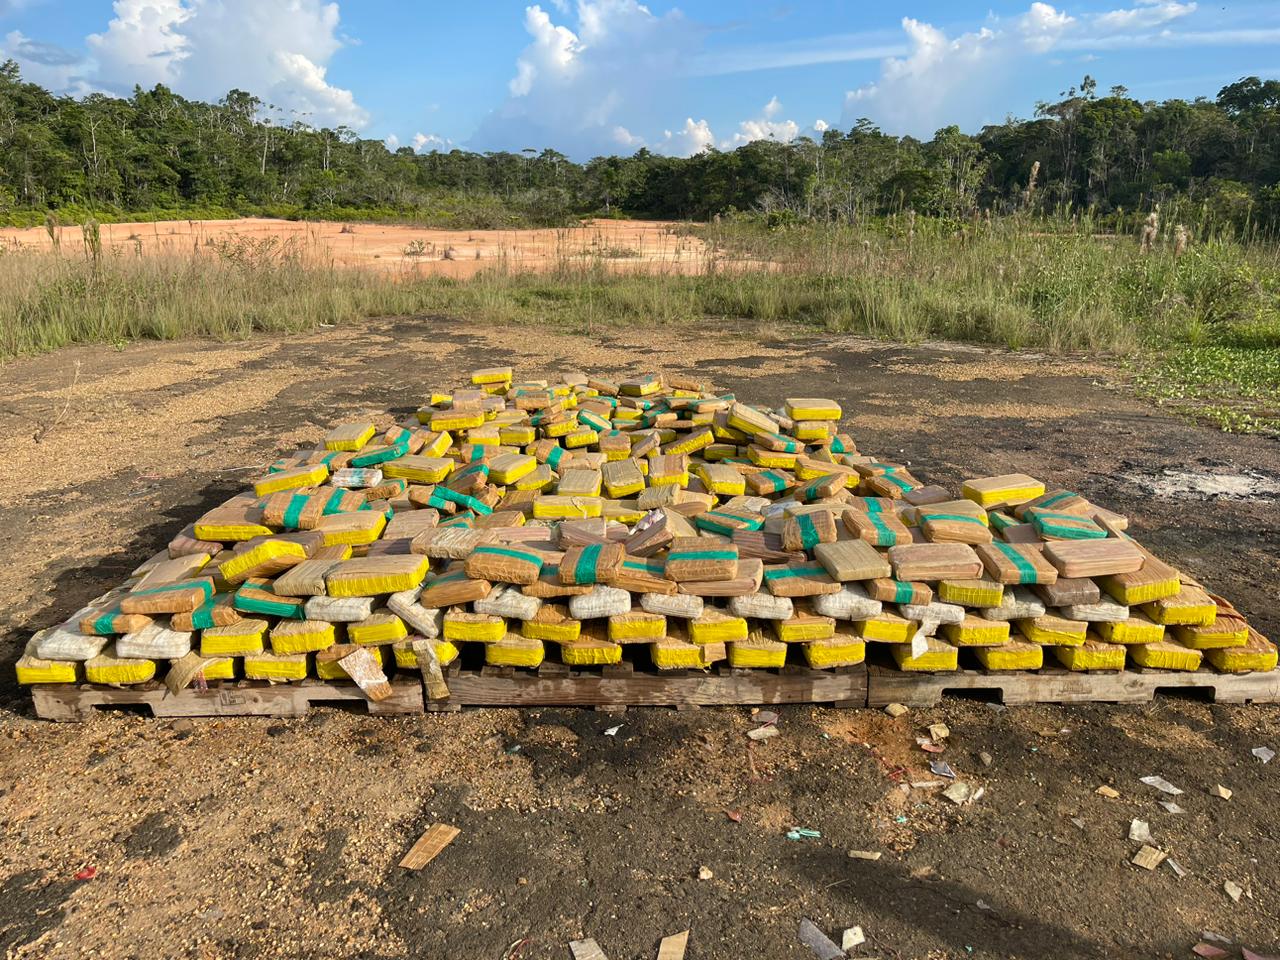 Brigada das Missões seized more than 3.5 tons of drugs on the border in 2022